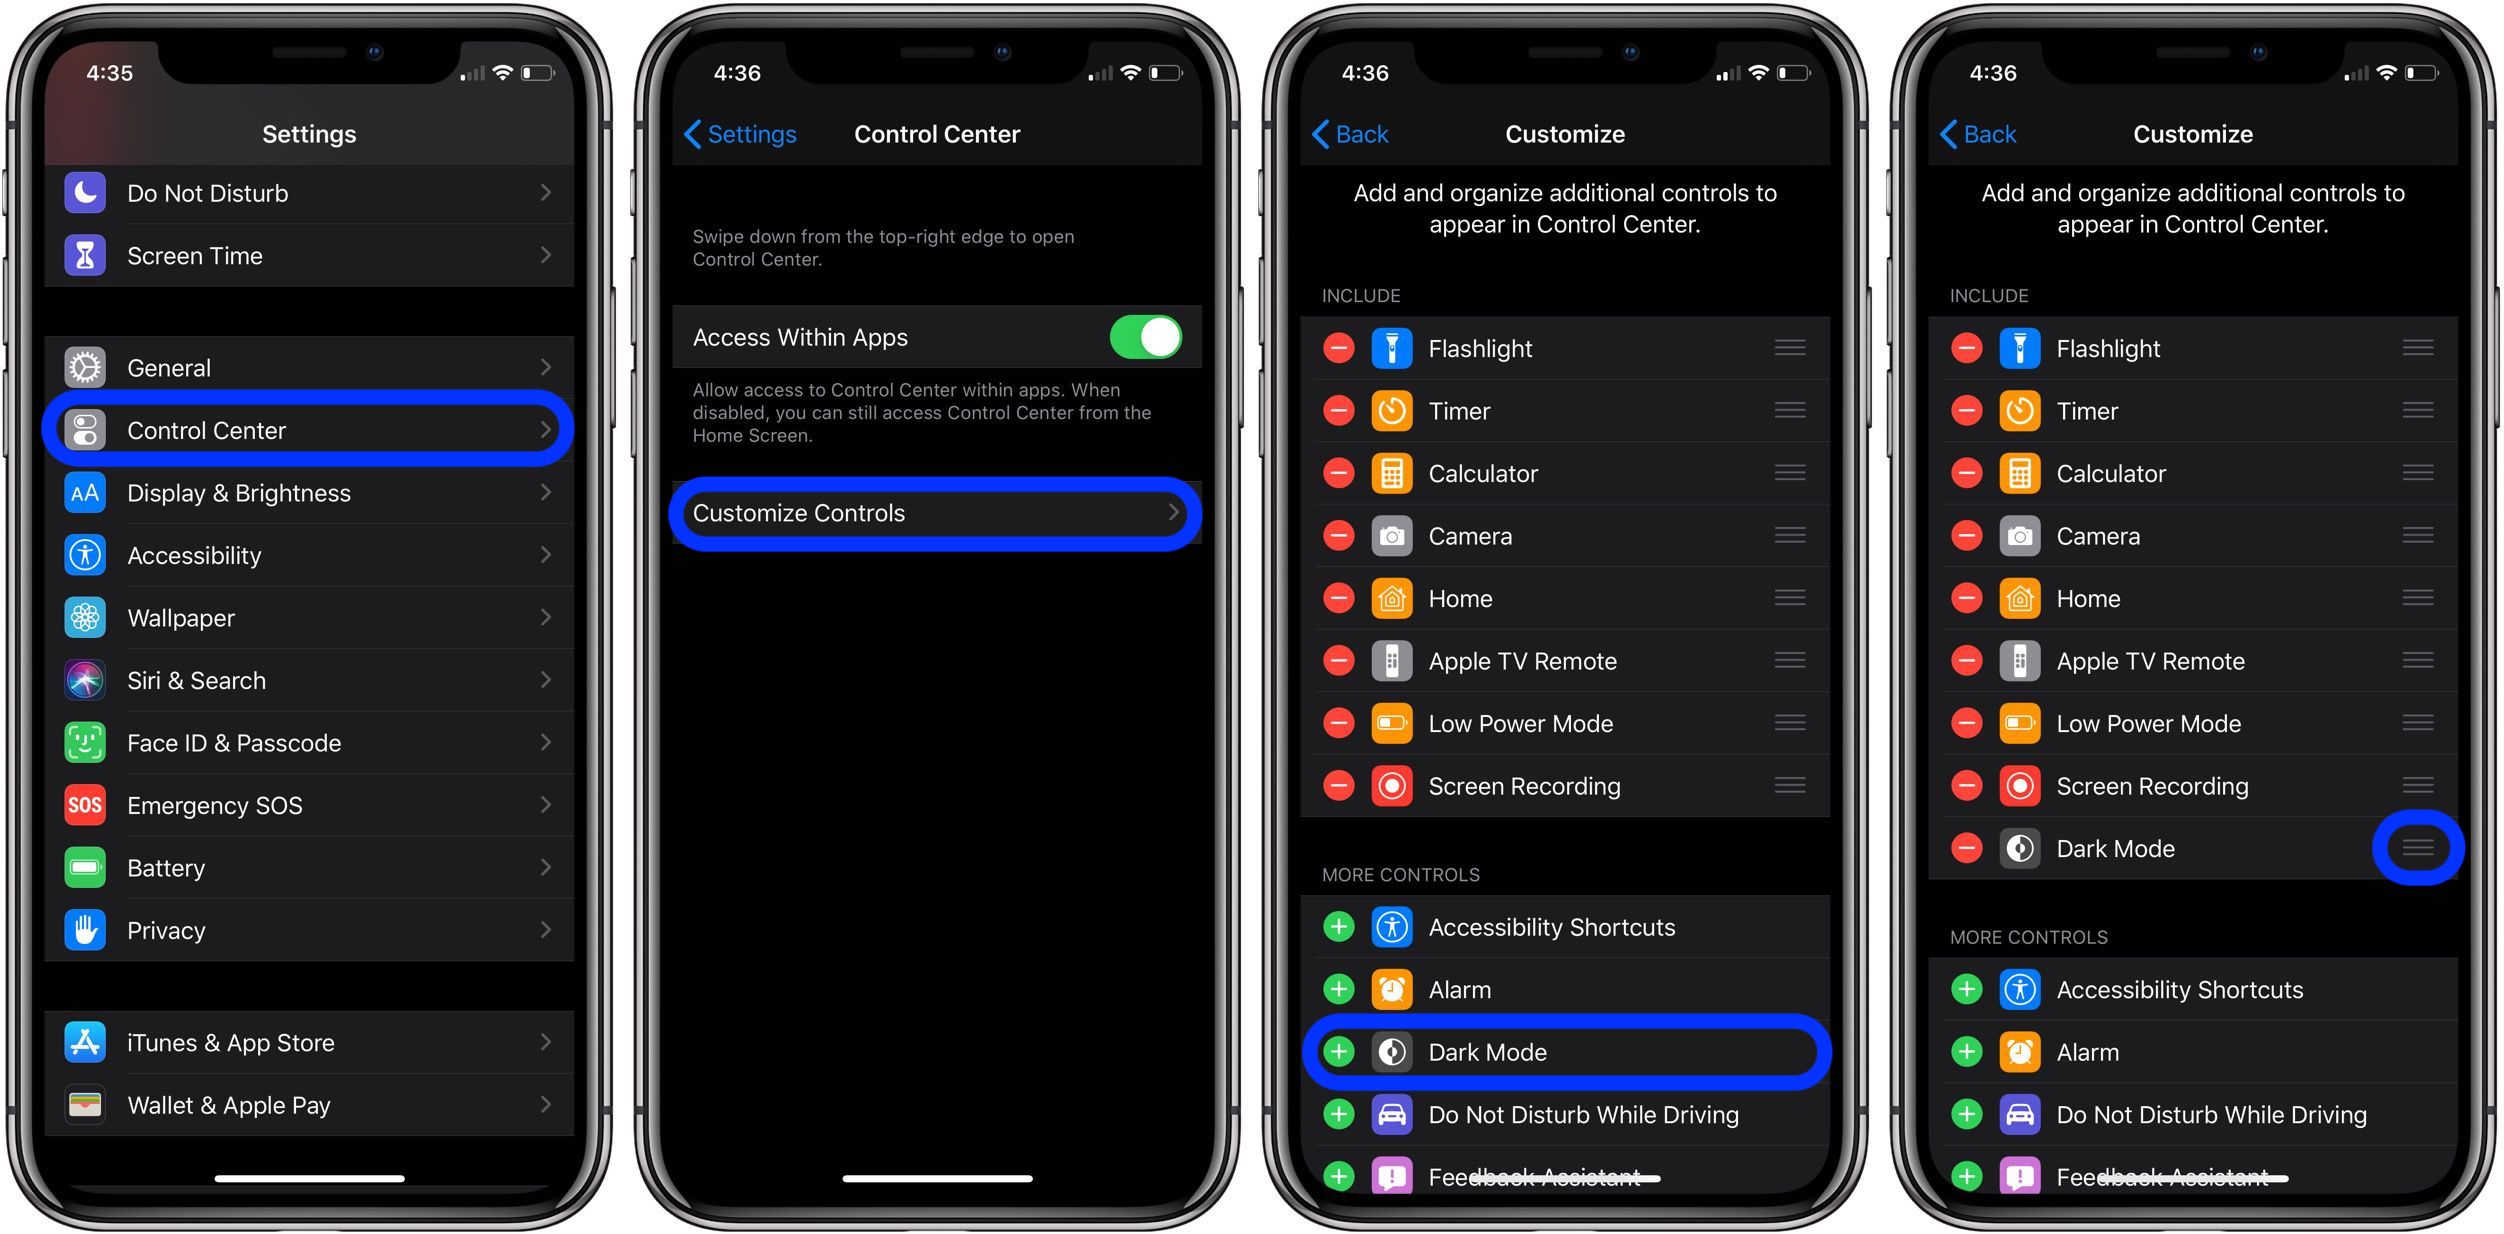 How to add Dark Mode shortcut on iPhone in iOS 13